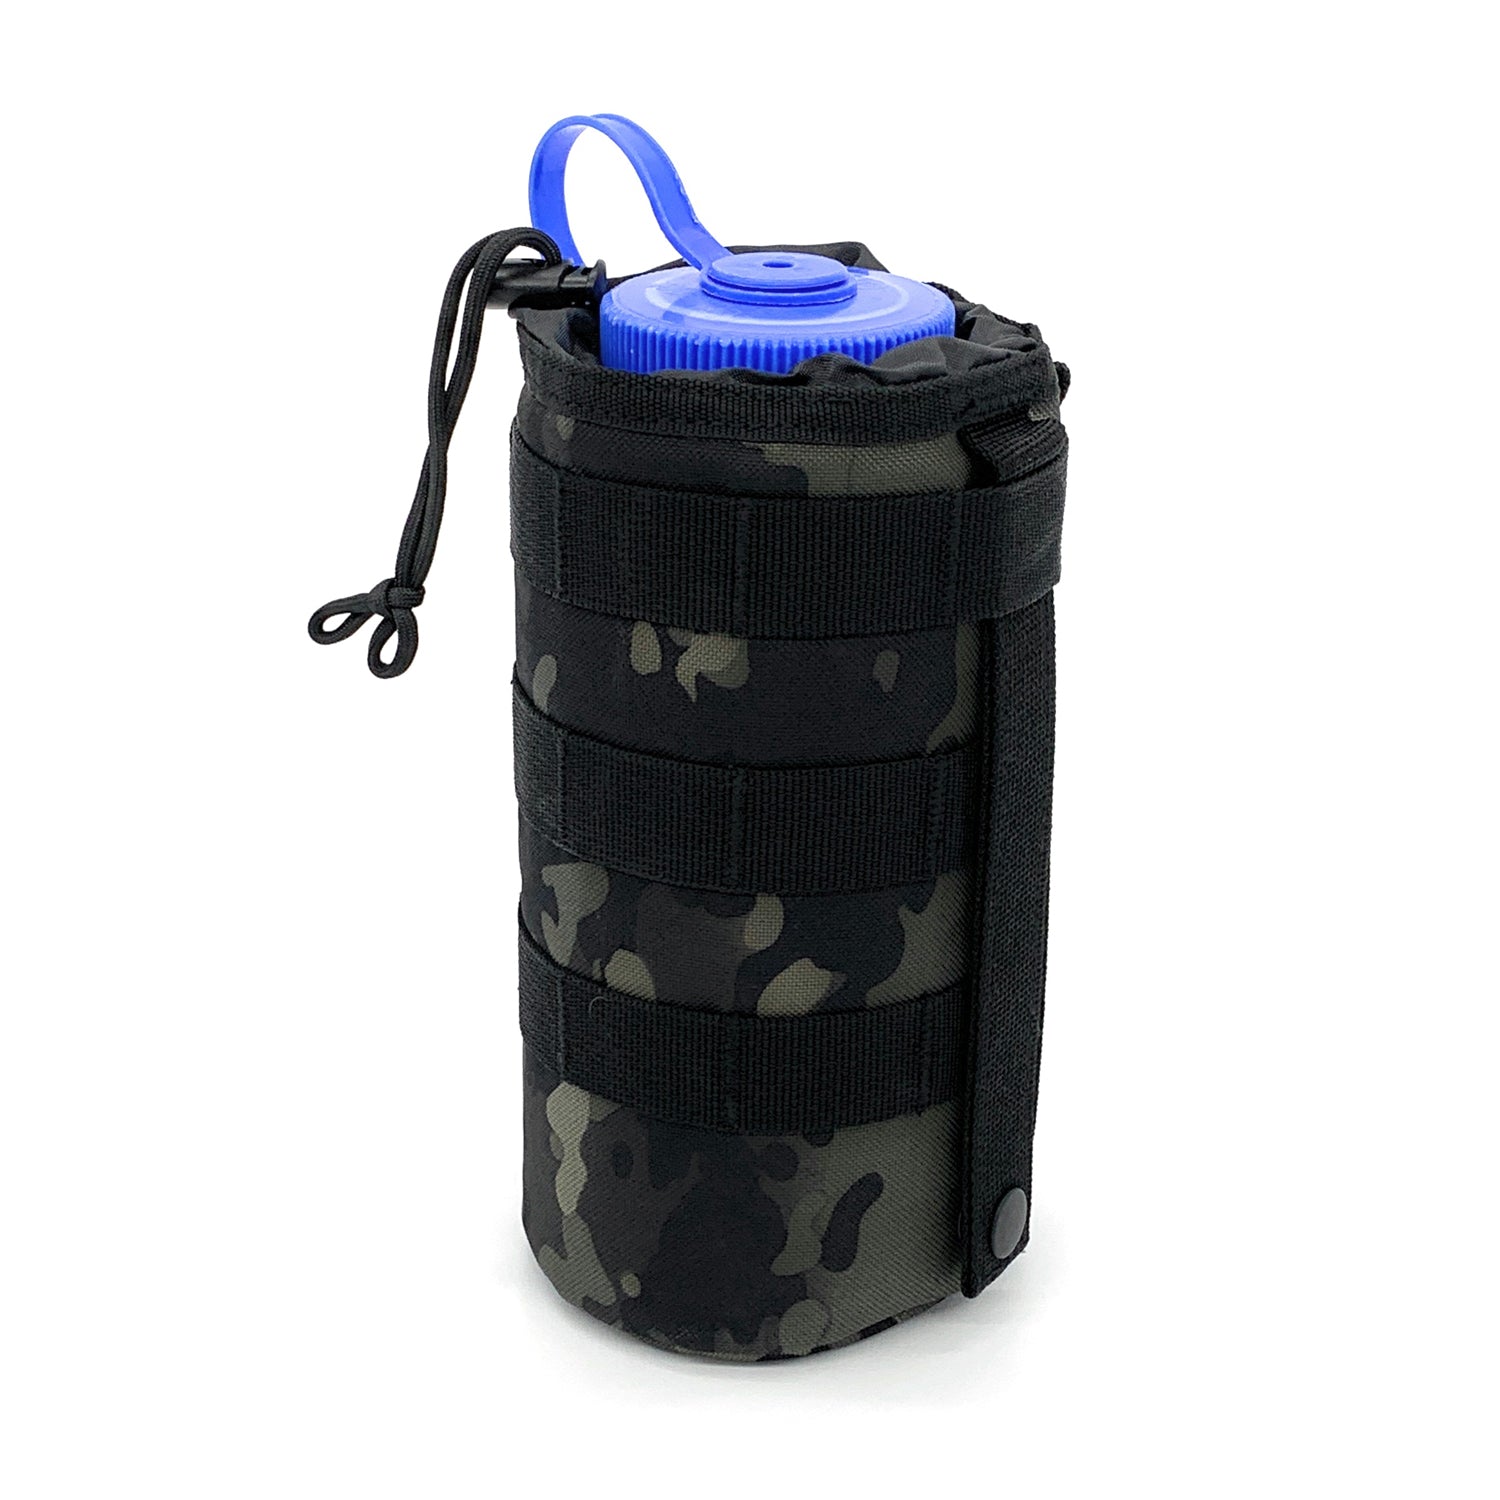 XZNGL 1000ML Water Bottle Carrier Insulated Cover Bag Holder Strap Pouch  Outdoor 